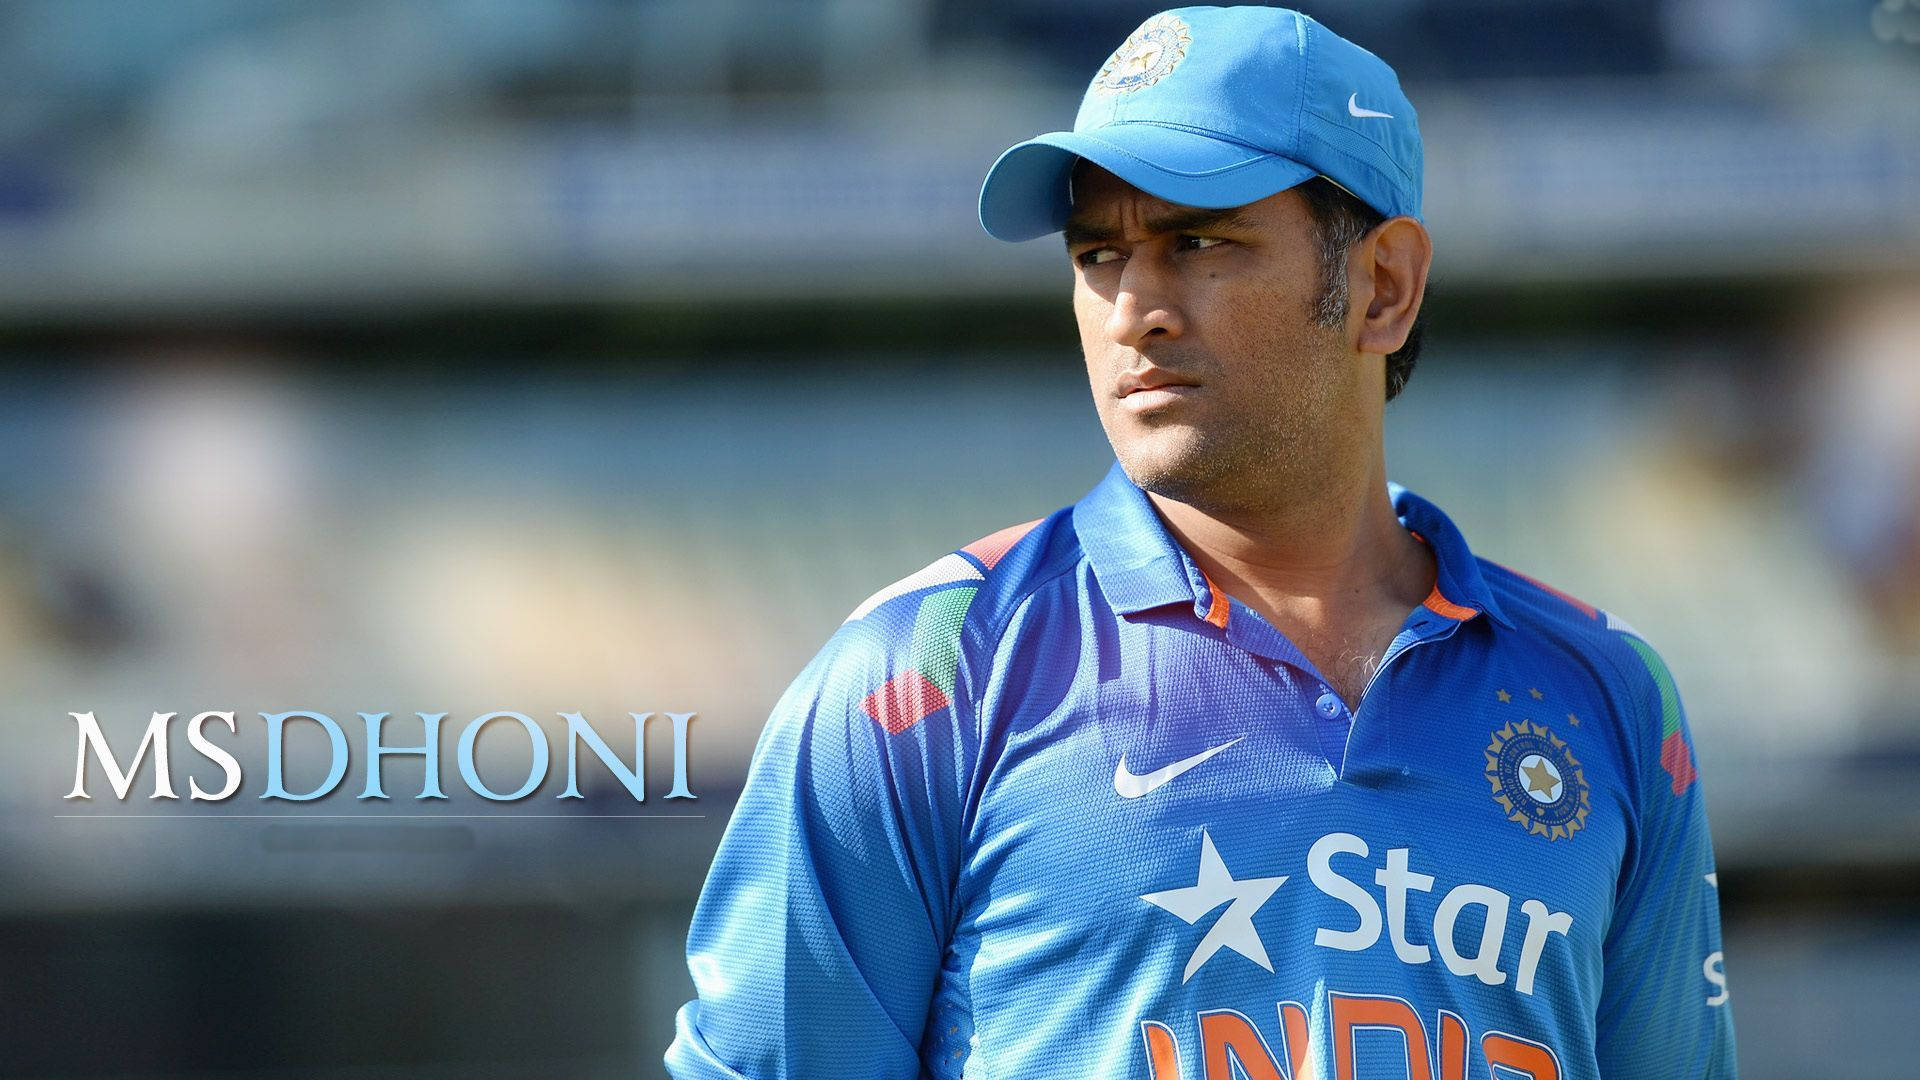 Former Indian Cricket Team Captain, MS Dhoni In Action Wallpaper